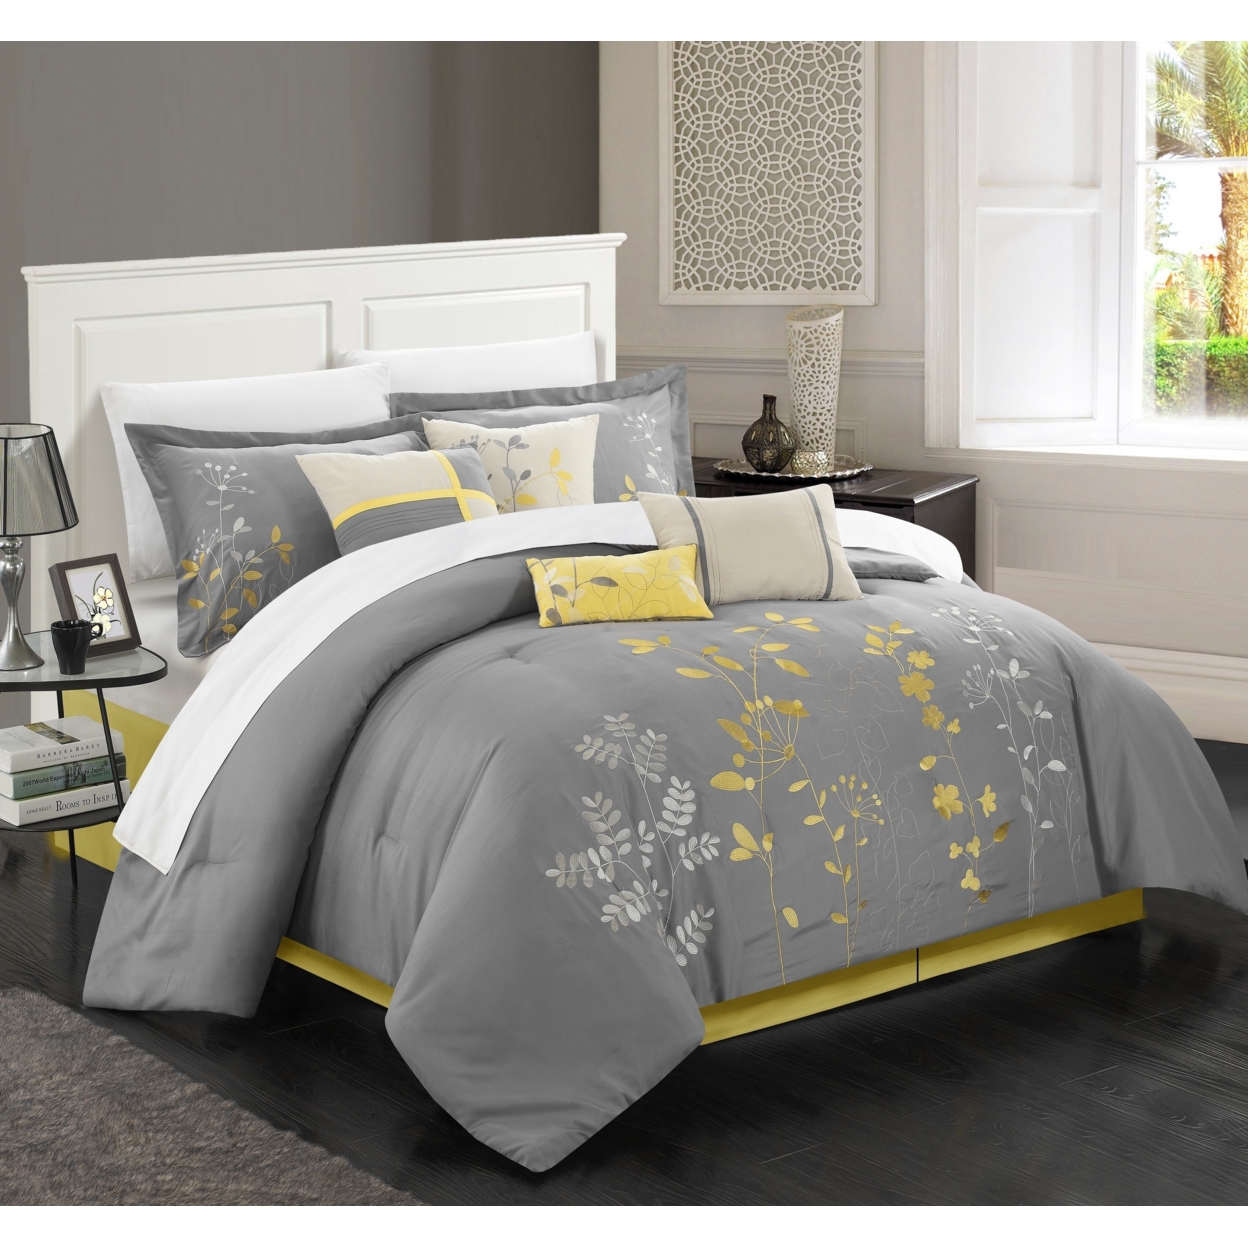 Brooke 8-Piece Embroidered Bed Comforter Set - Yellow, King